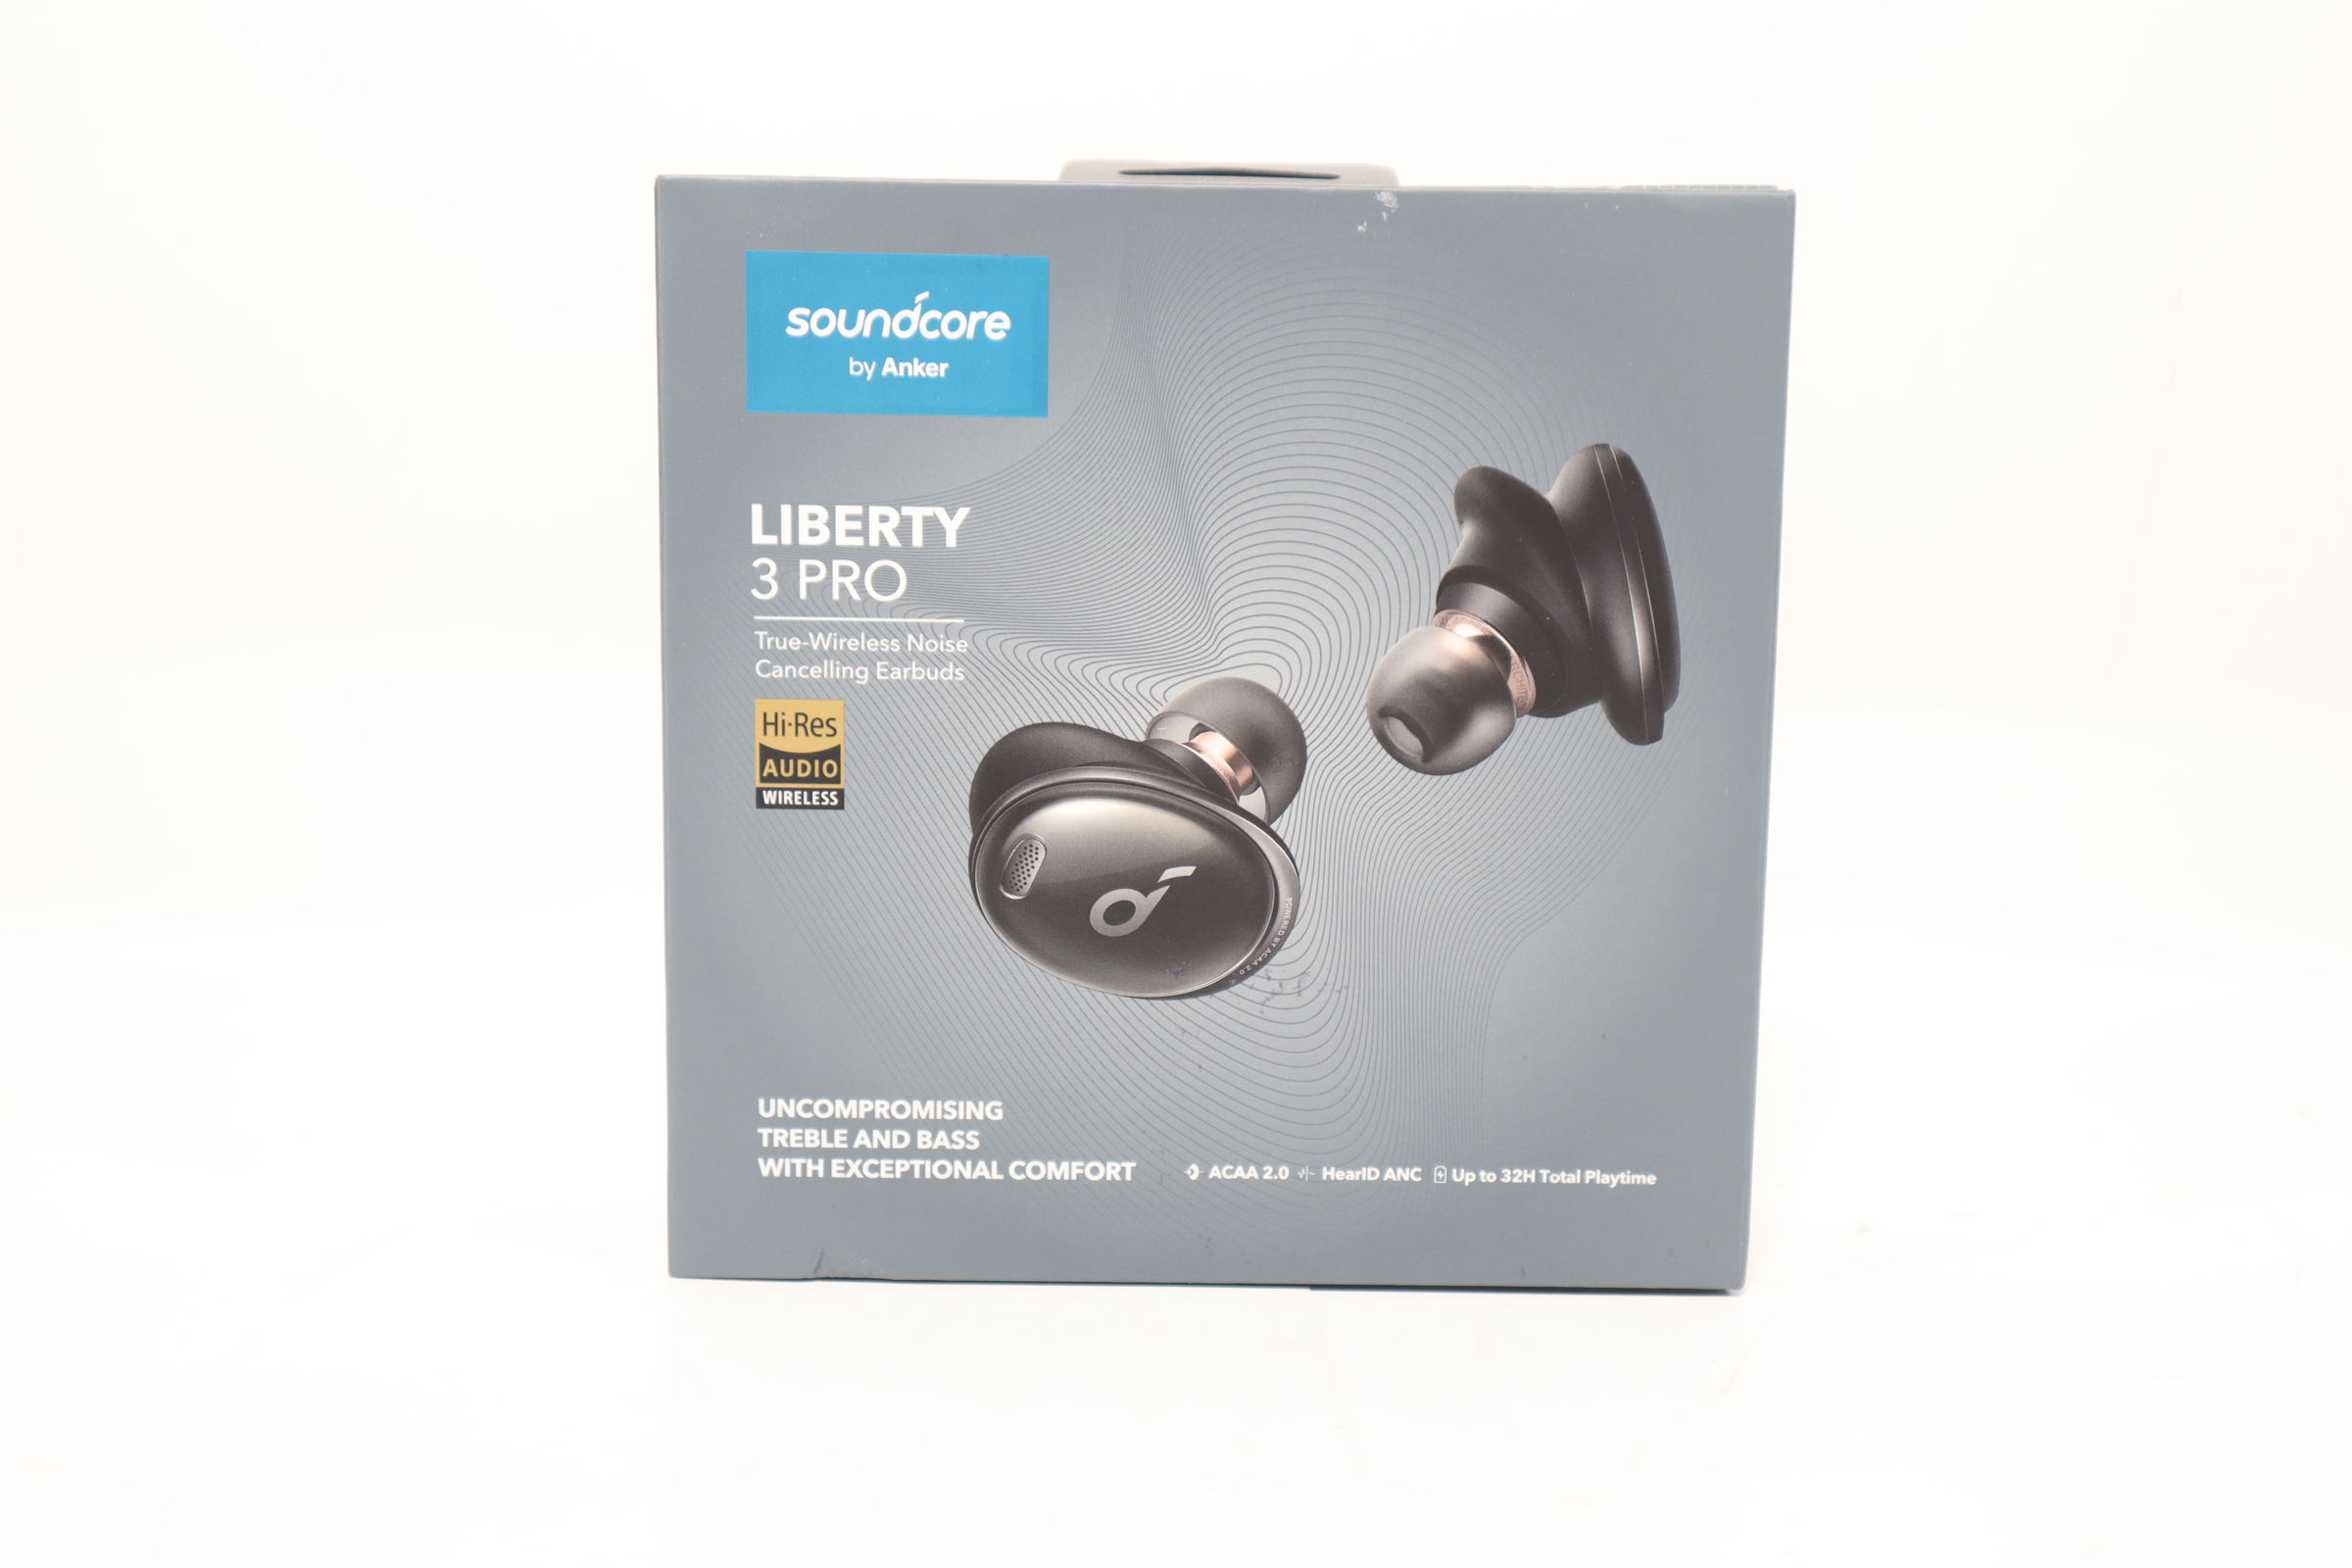 Anker's noise-canceling Soundcore Liberty 3 Pro are on sale for